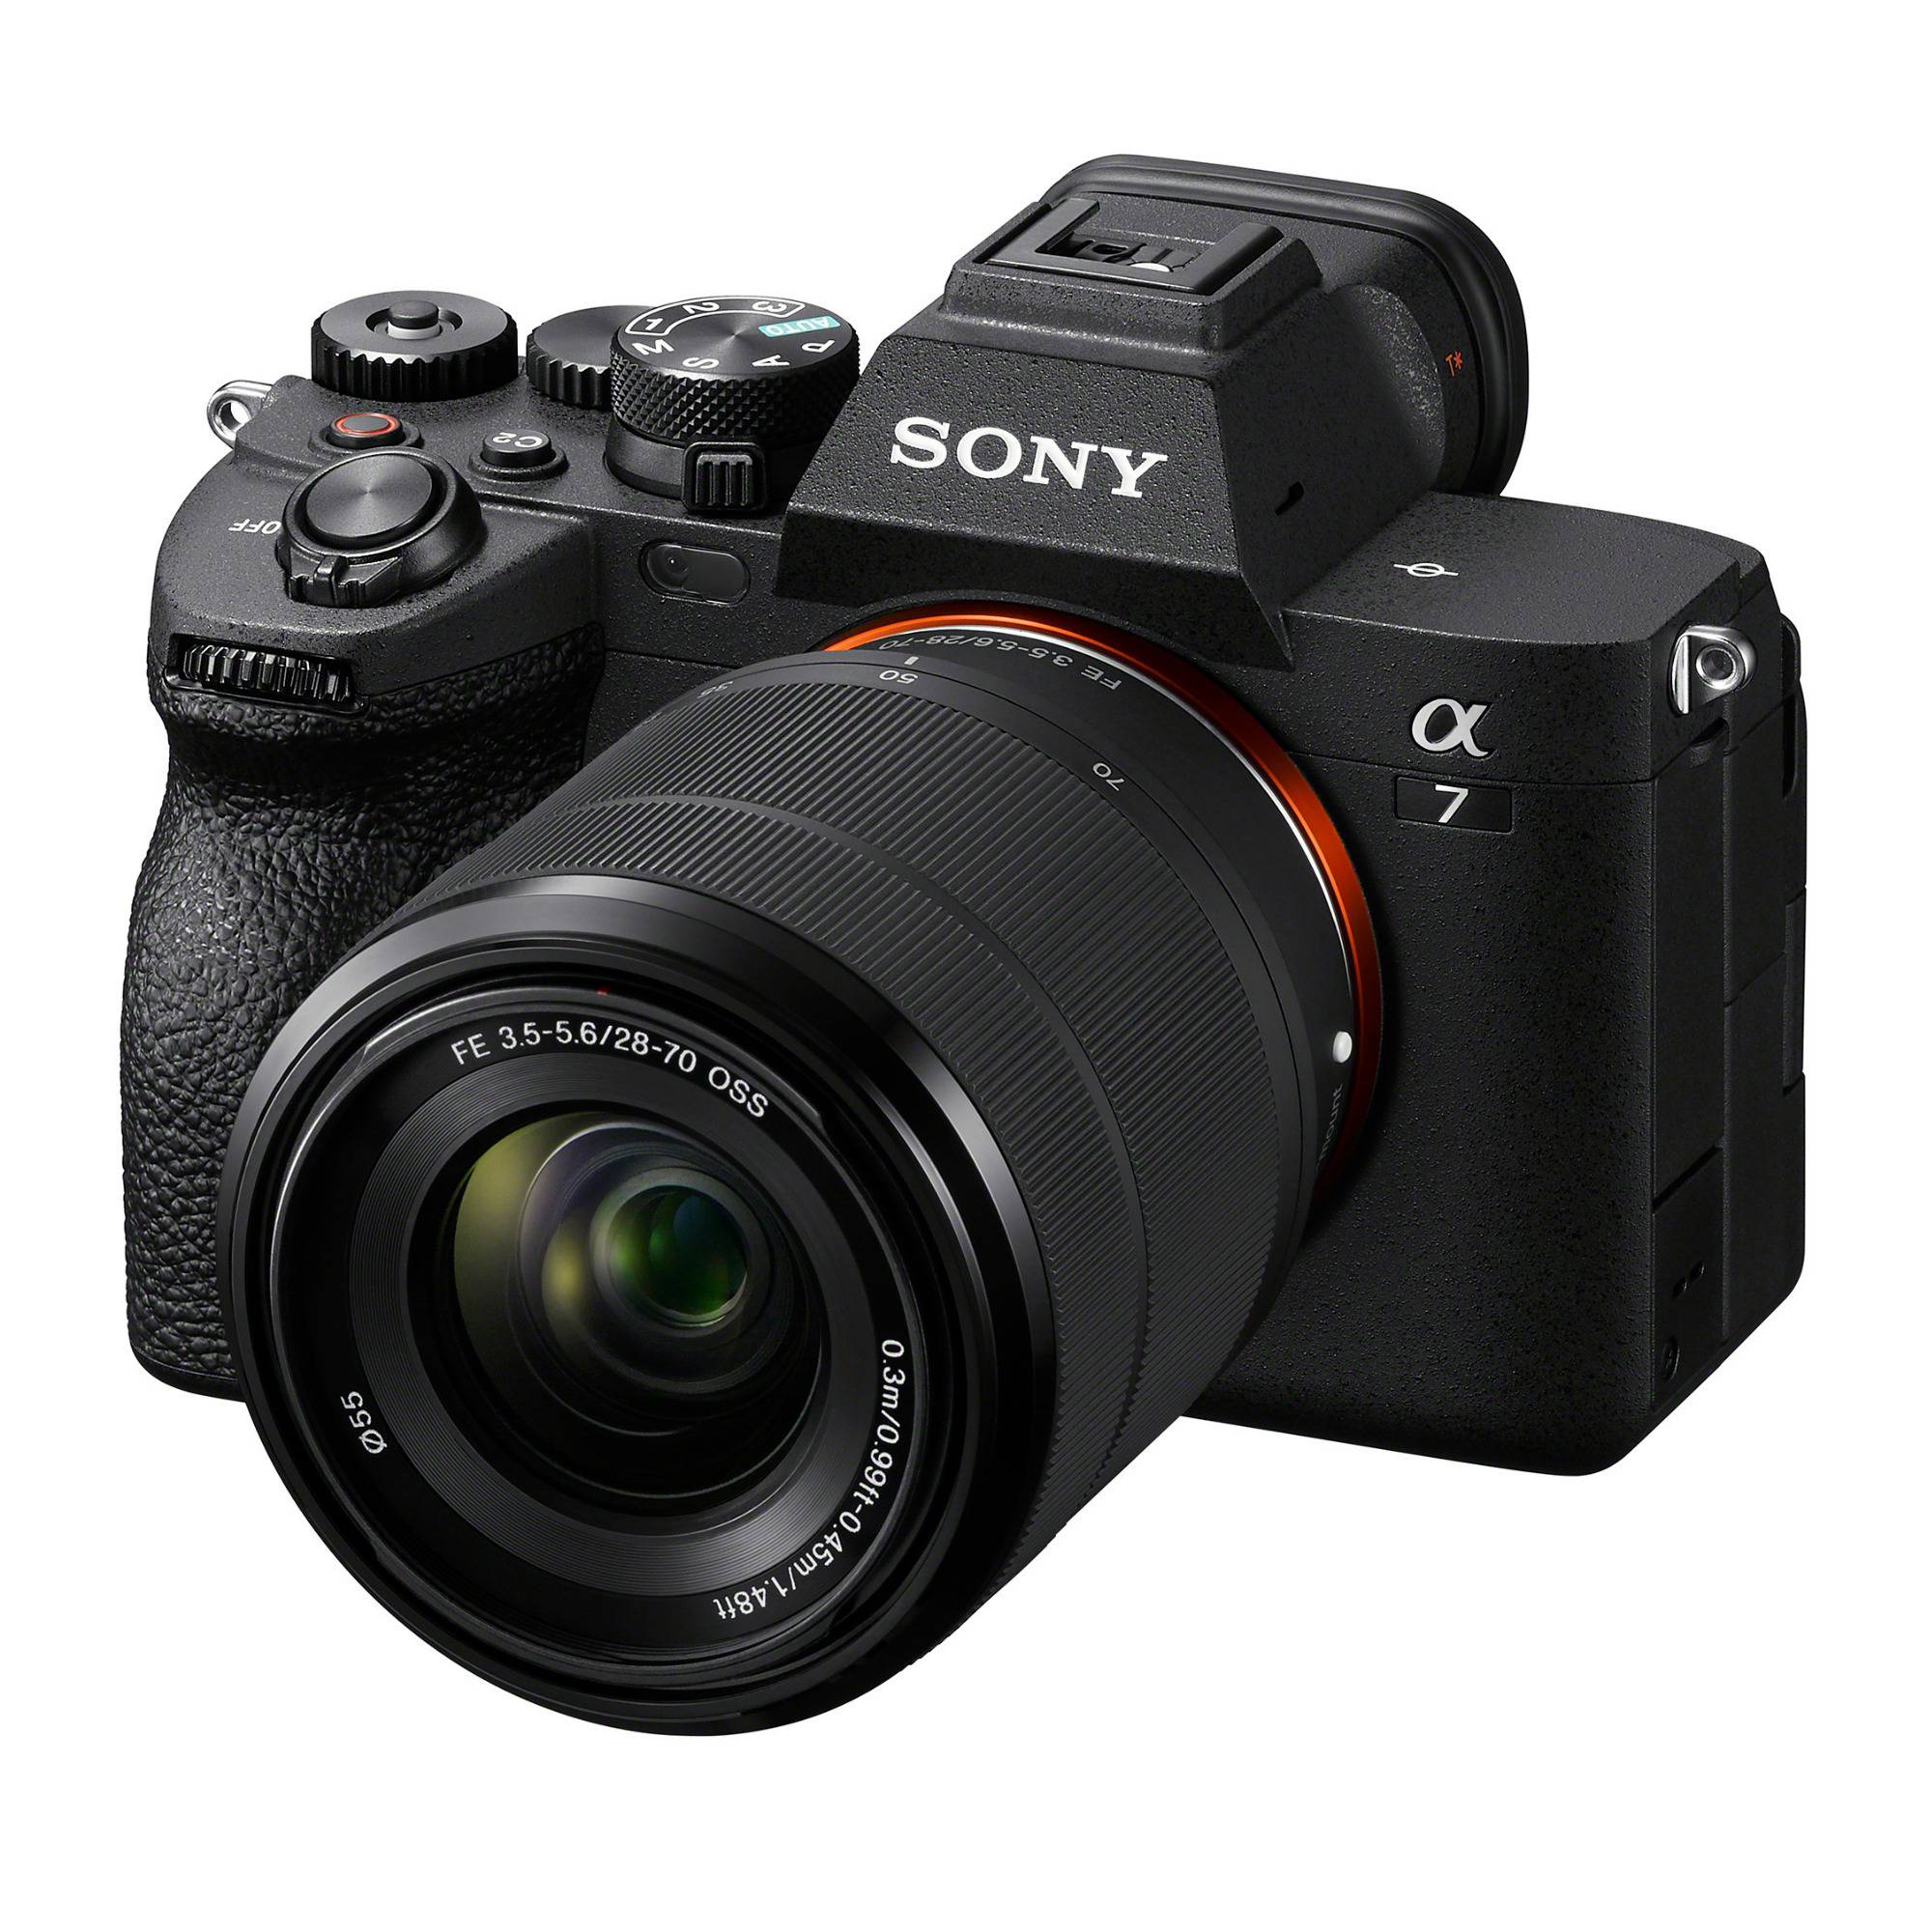 Sony Alpha 7 IV Full-frame Mirrorless Interchangeable Lens Camera (with 28-70mm Lens)